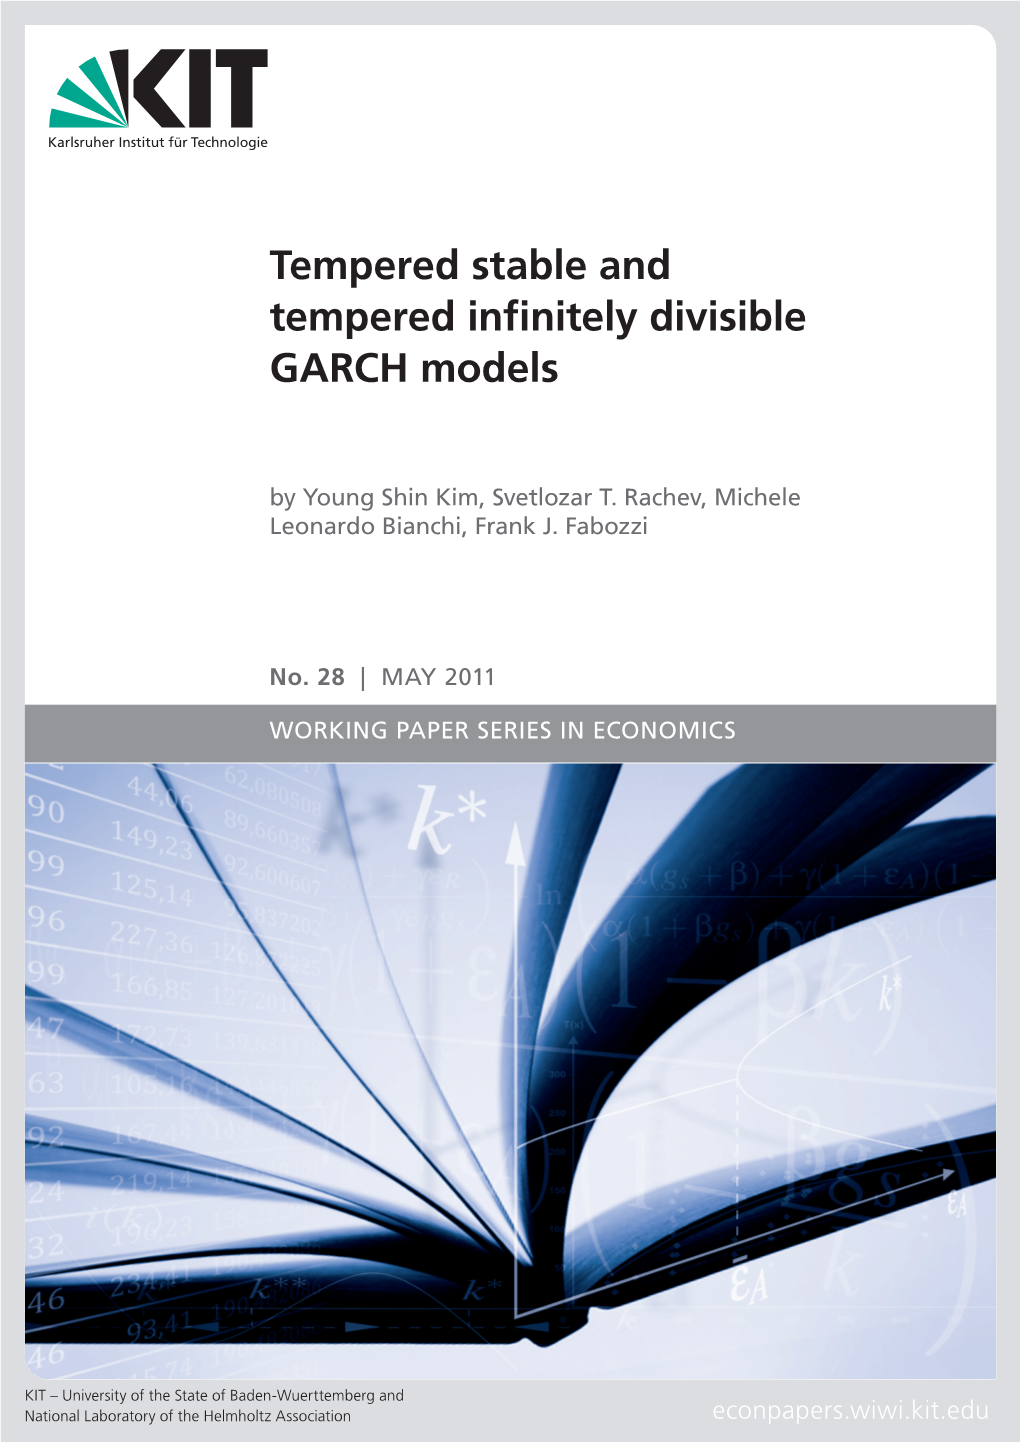 Tempered Stable and Tempered Infinitely Divisible GARCH Models